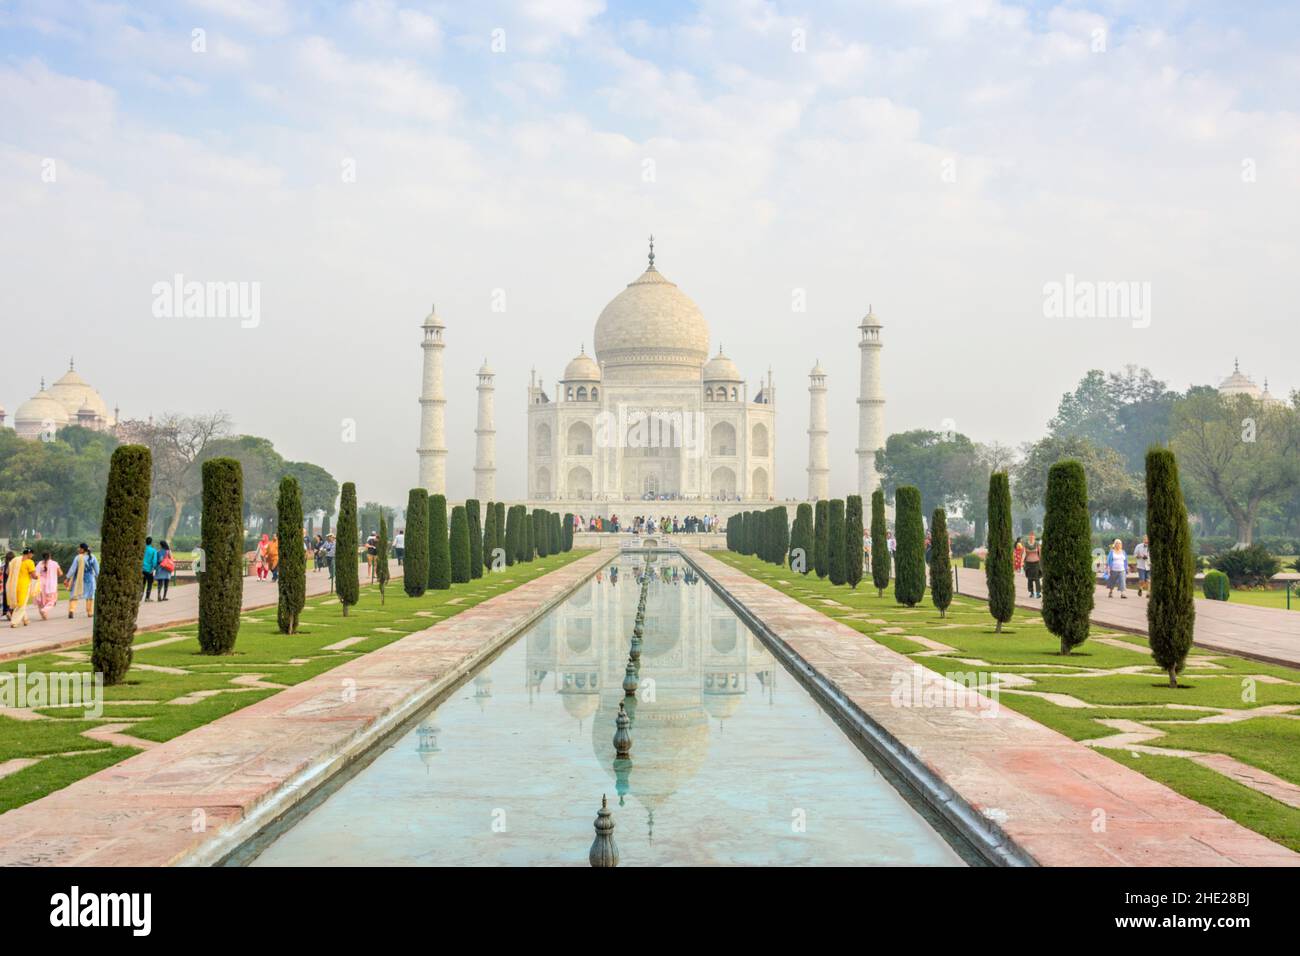 Early morning view of the Taj Mahal reflected in the reflecting pool, Agra, Uttar Pradesh, India, South Asia Stock Photo